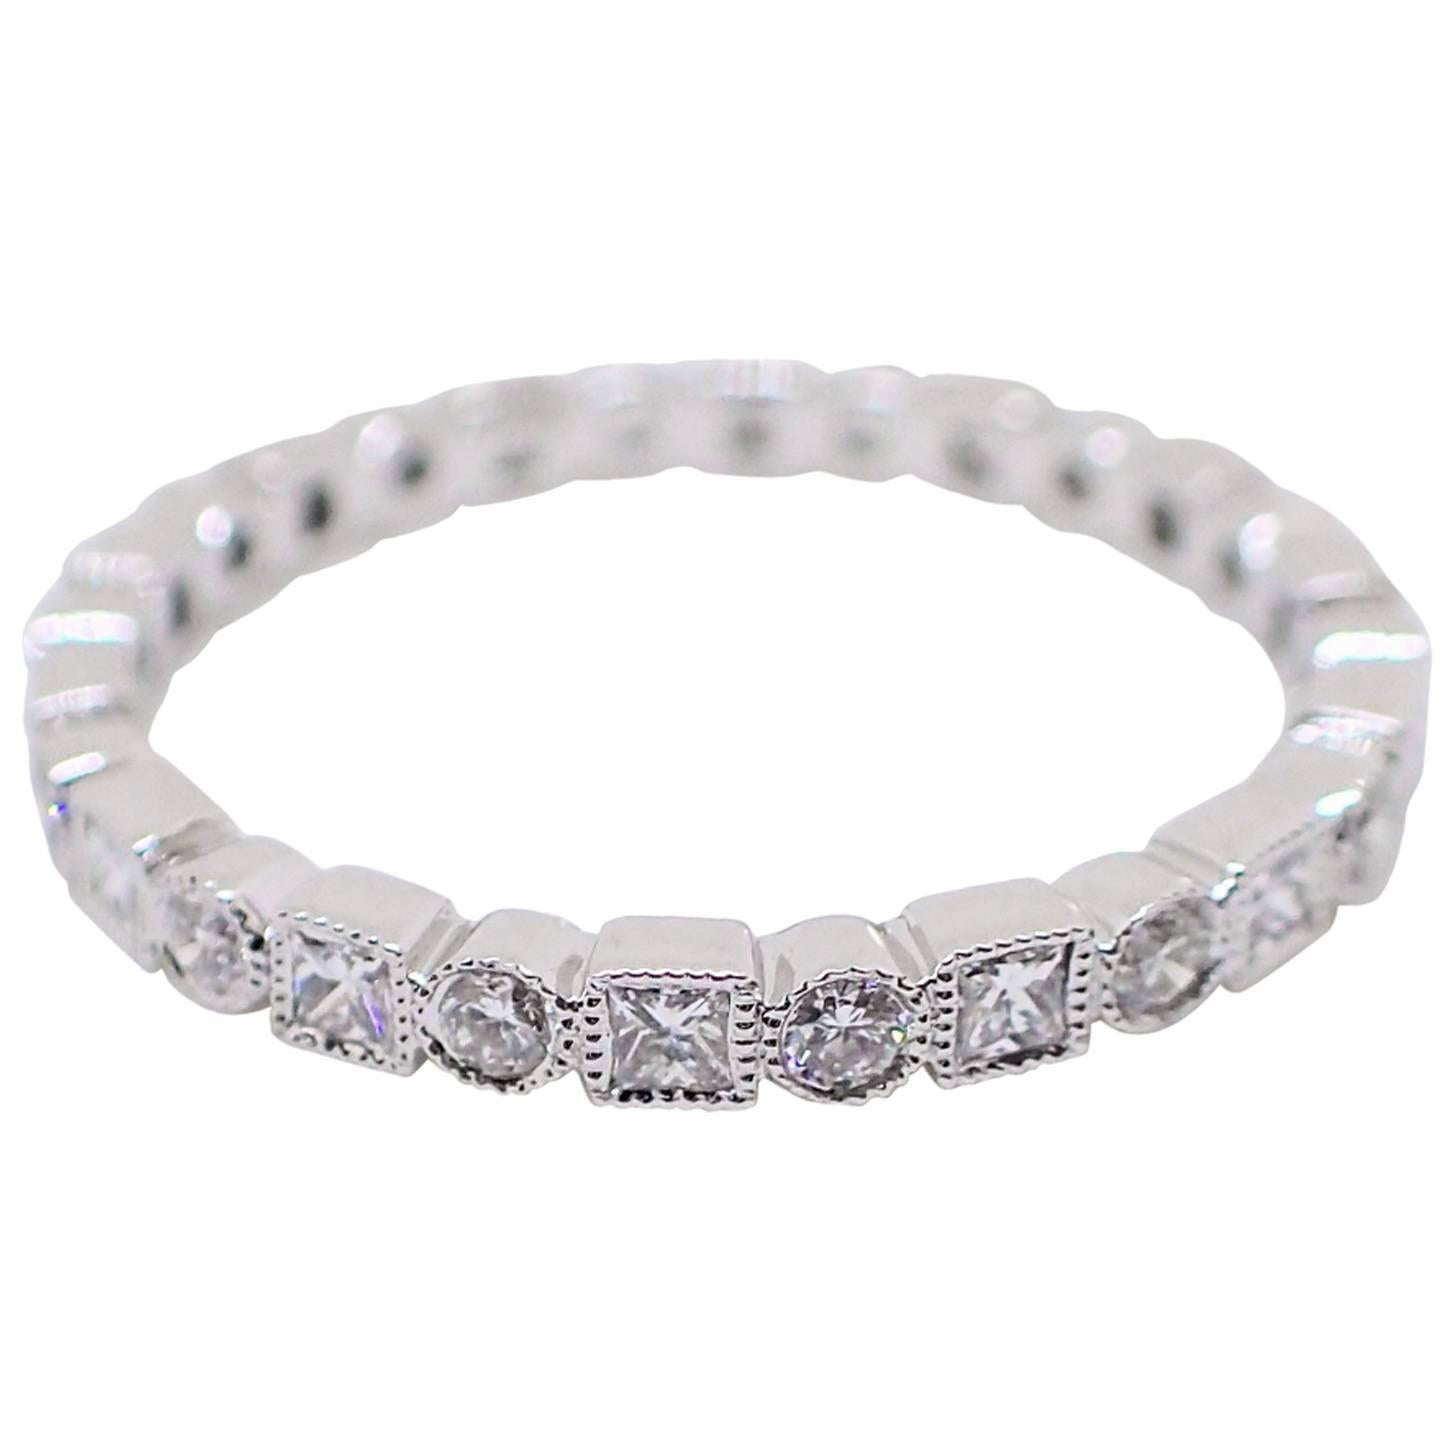 18k white gold eternity band is bezel bezel set with fourteen (14) Round Brilliant Cut diamonds that weigh a total of 0.26 carats with Clarity Grade VS-SI and Color Grade G and fourteen (14) Princess Cut diamonds that weigh a total of 0.38 carats